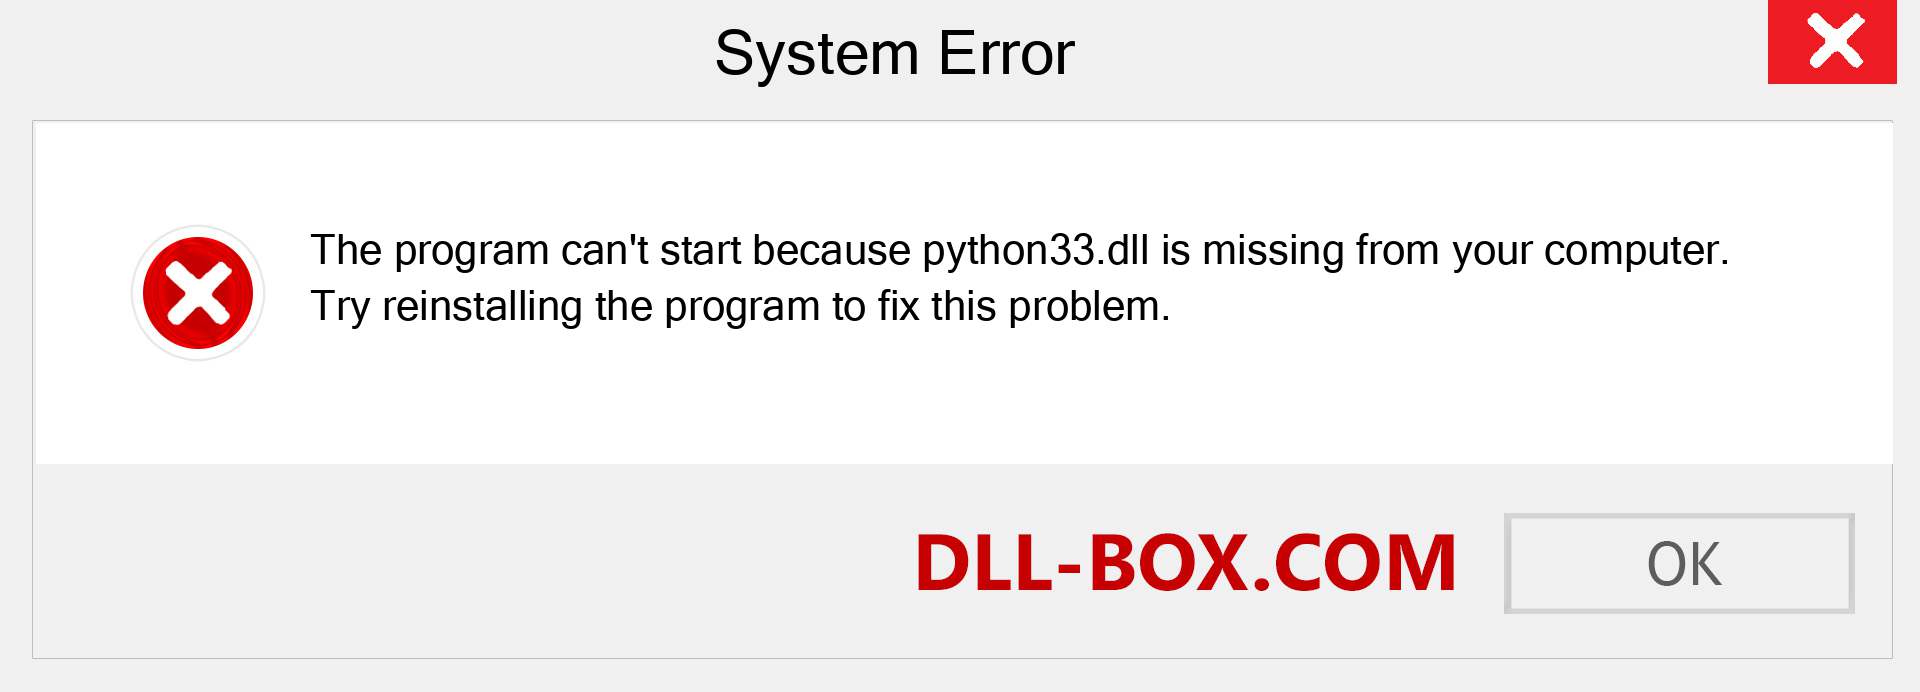  python33.dll file is missing?. Download for Windows 7, 8, 10 - Fix  python33 dll Missing Error on Windows, photos, images